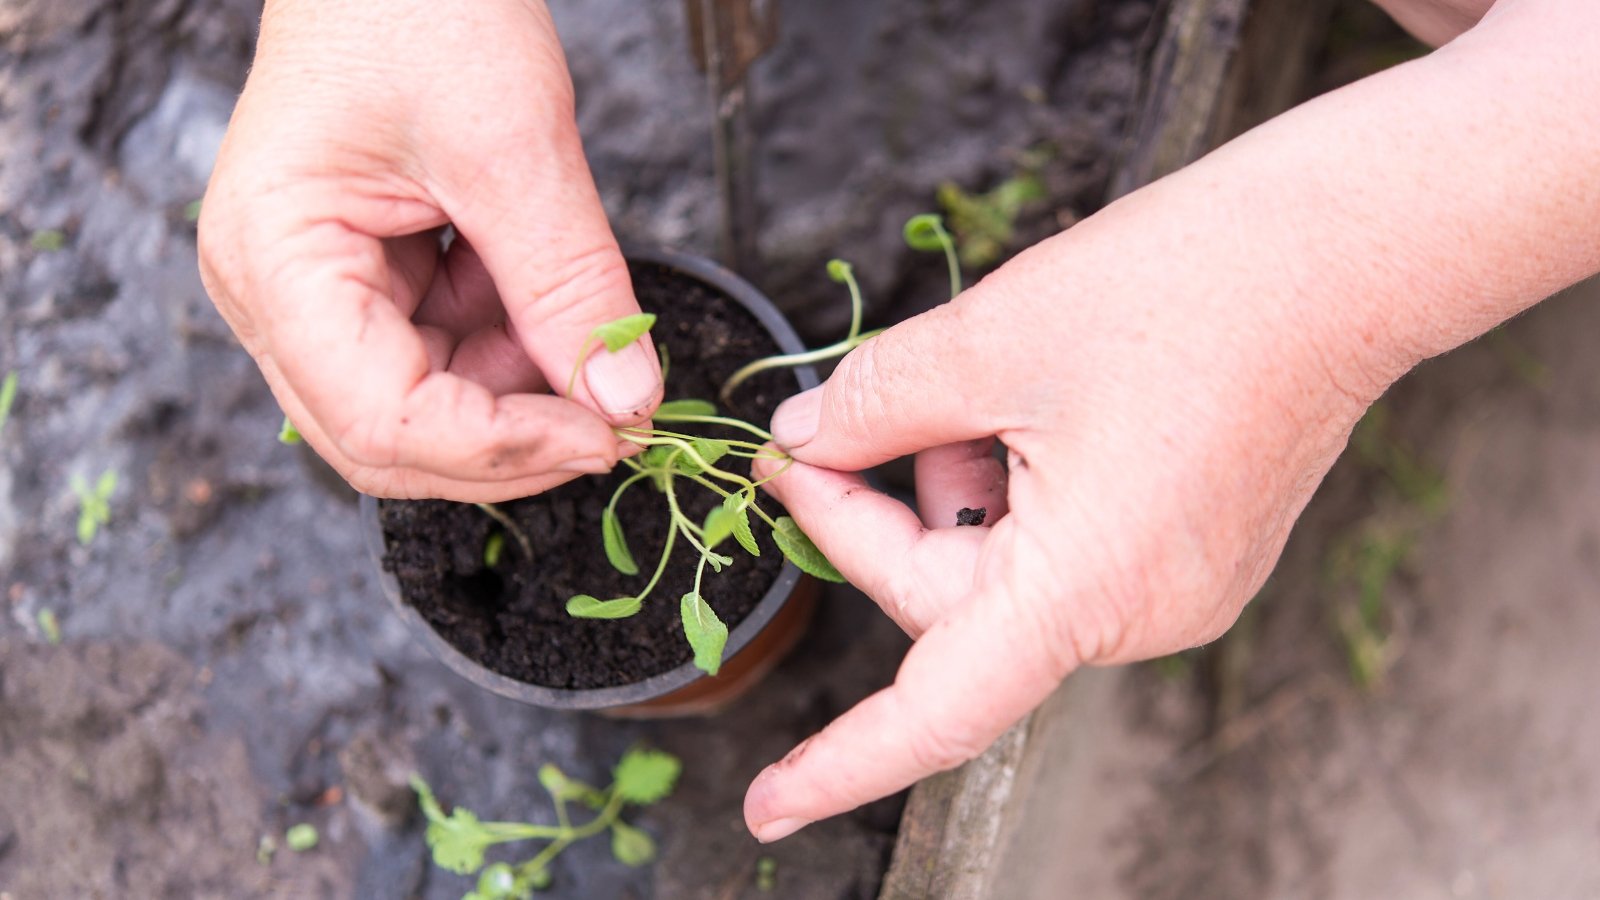 Close-up of a gardener's hands replanting young salvia seedlings with thin bending stems covered with small lance-shaped green leaves growing in a small flower pot.